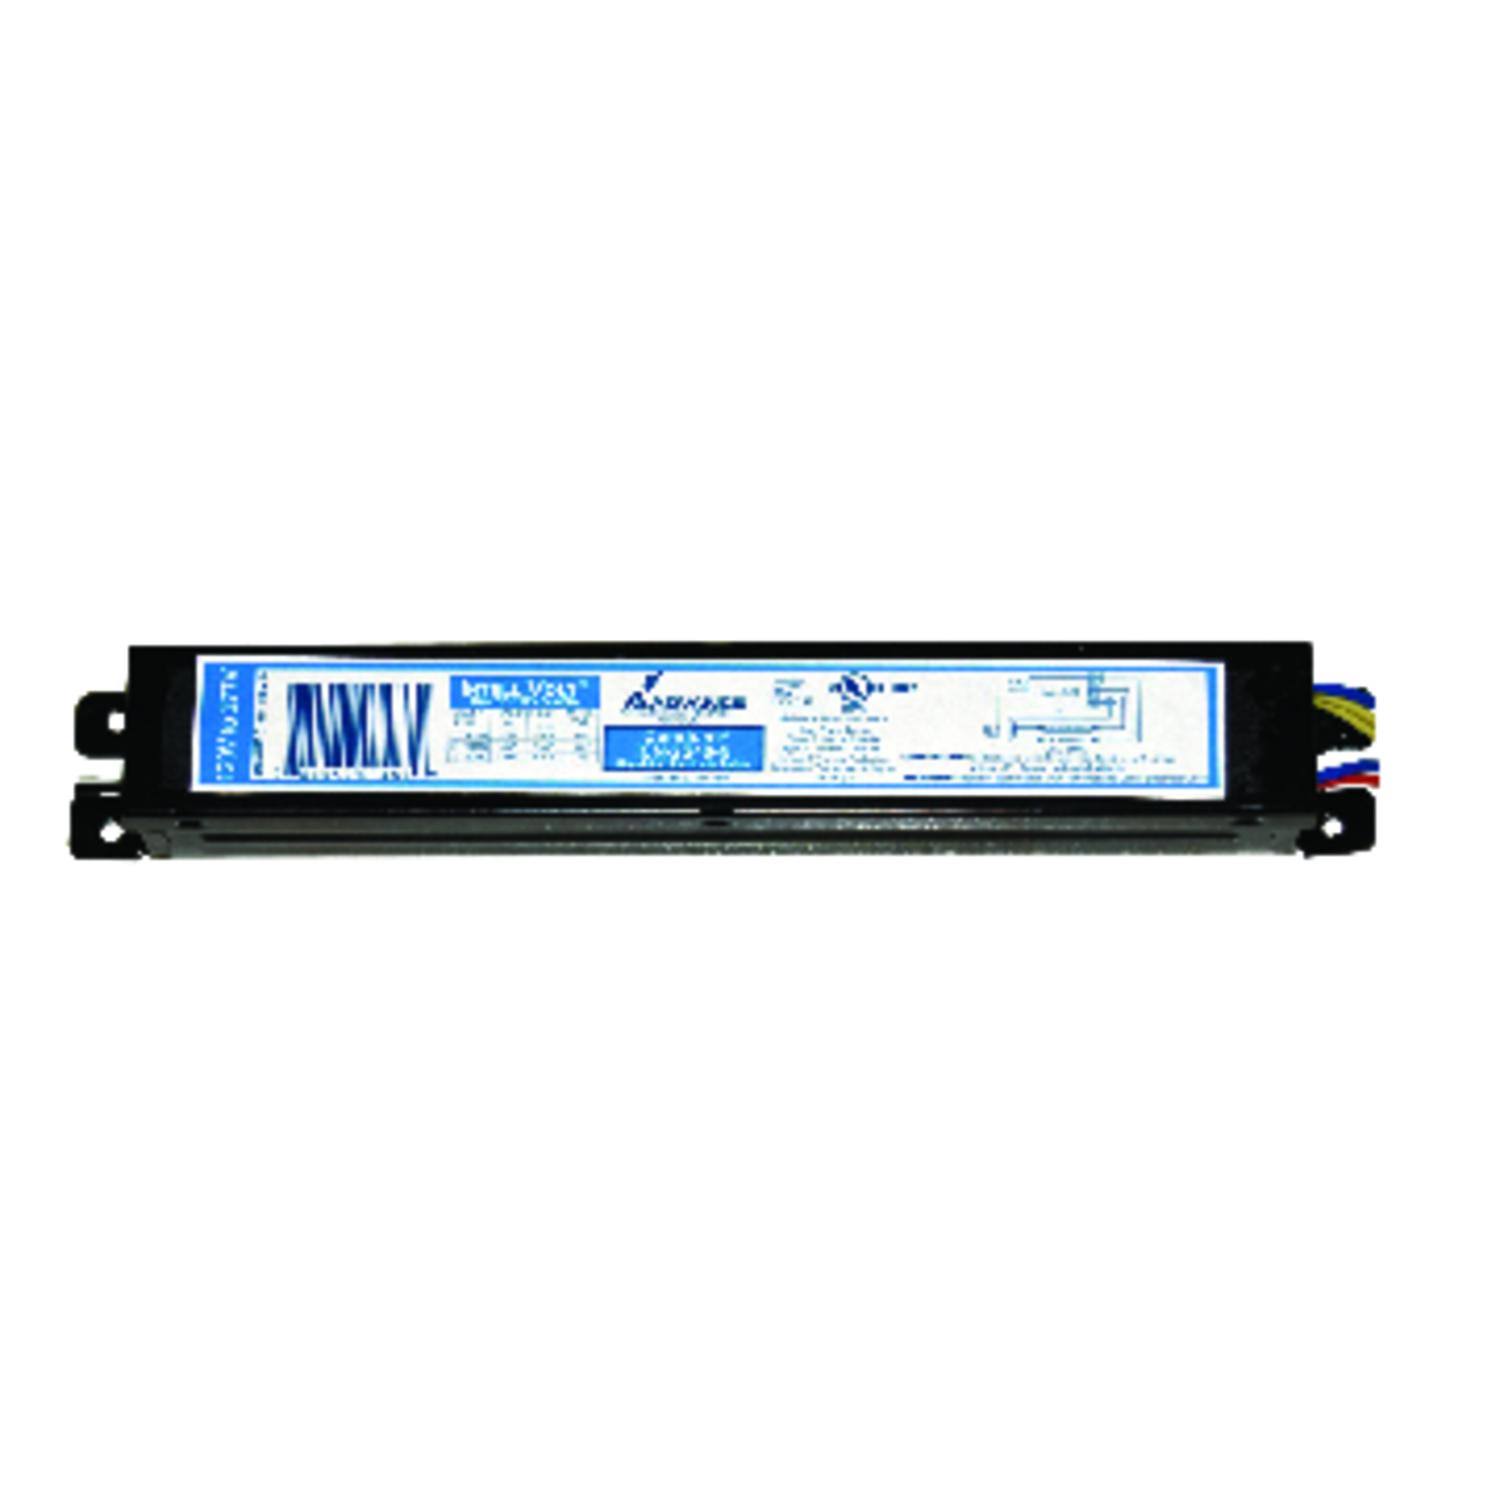 Philips Advance Electronic Ballast - 277V, T12 Lamps